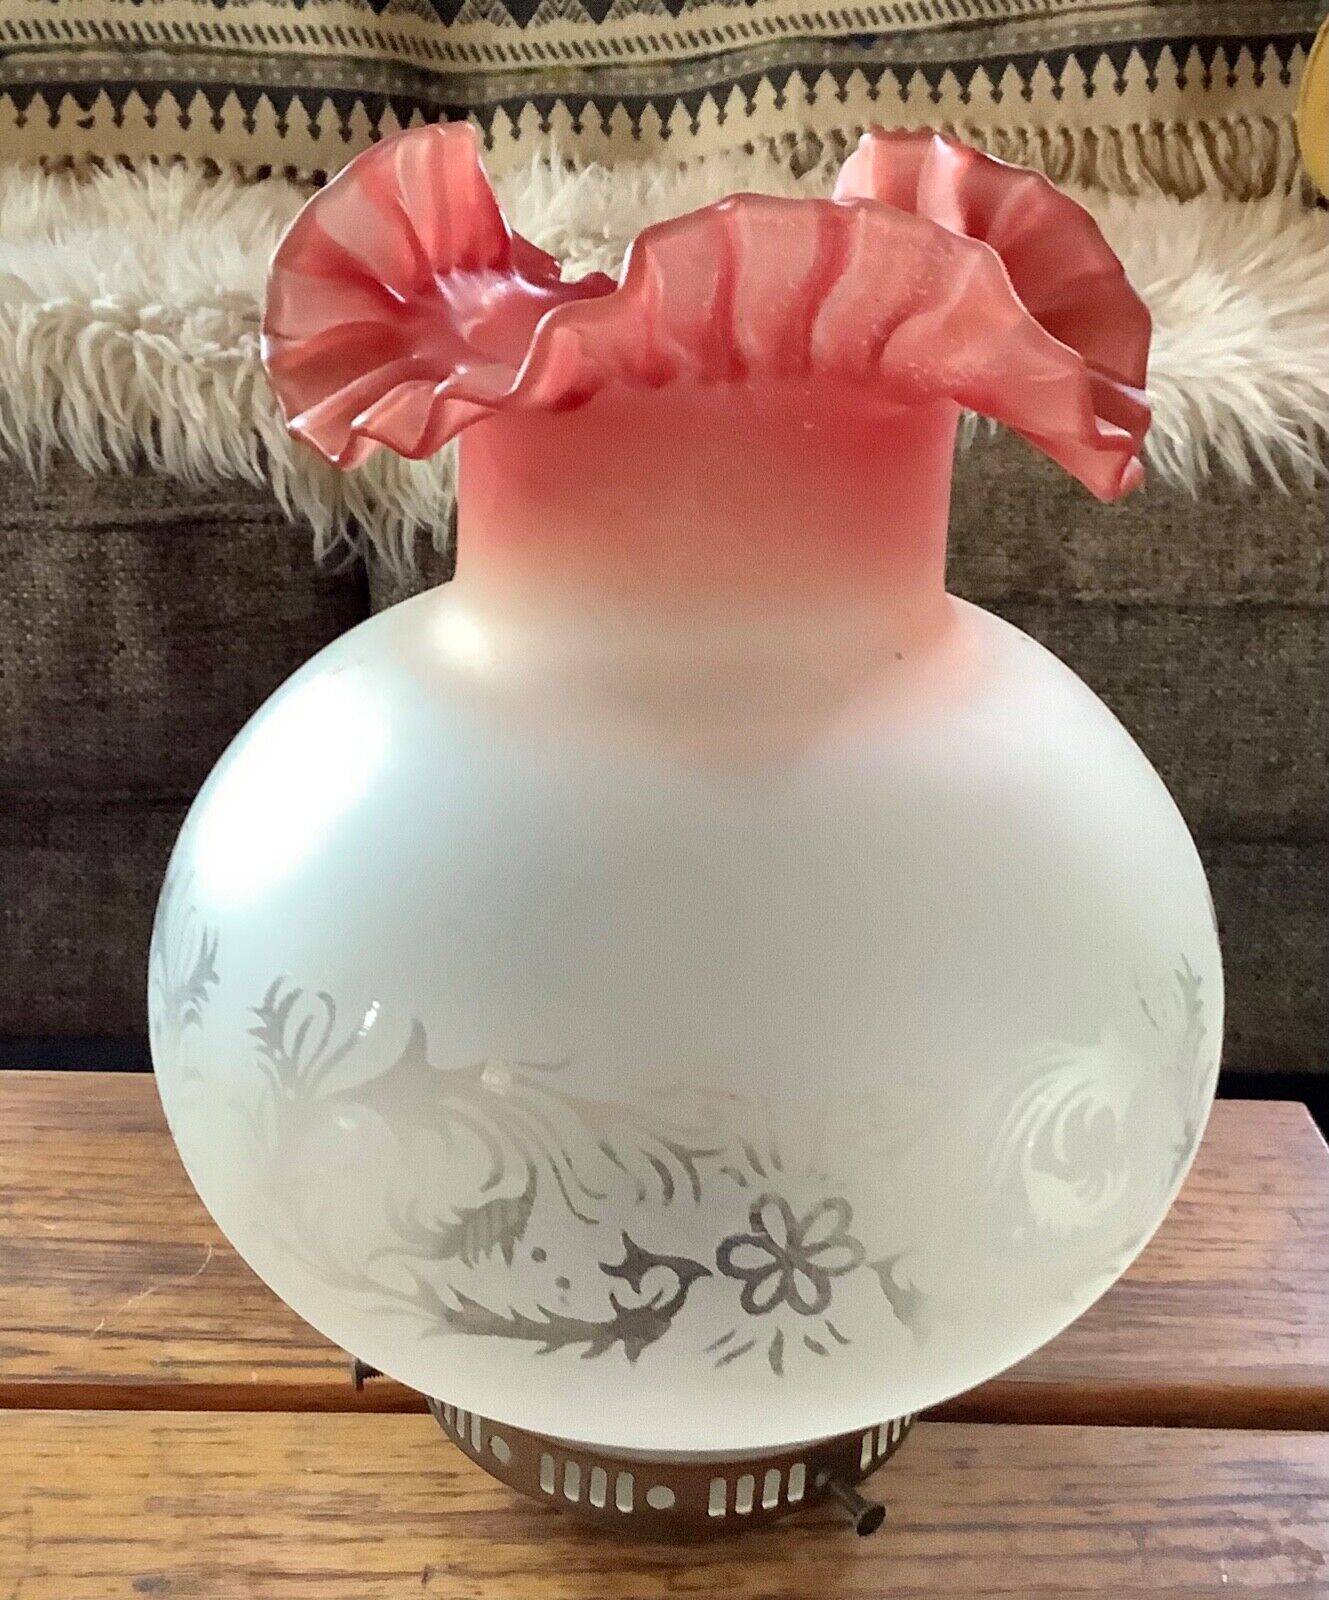 Ruffled Cranberry Satin Etched Glass Oil Lamp Shade globe oil lamp Vtg antique